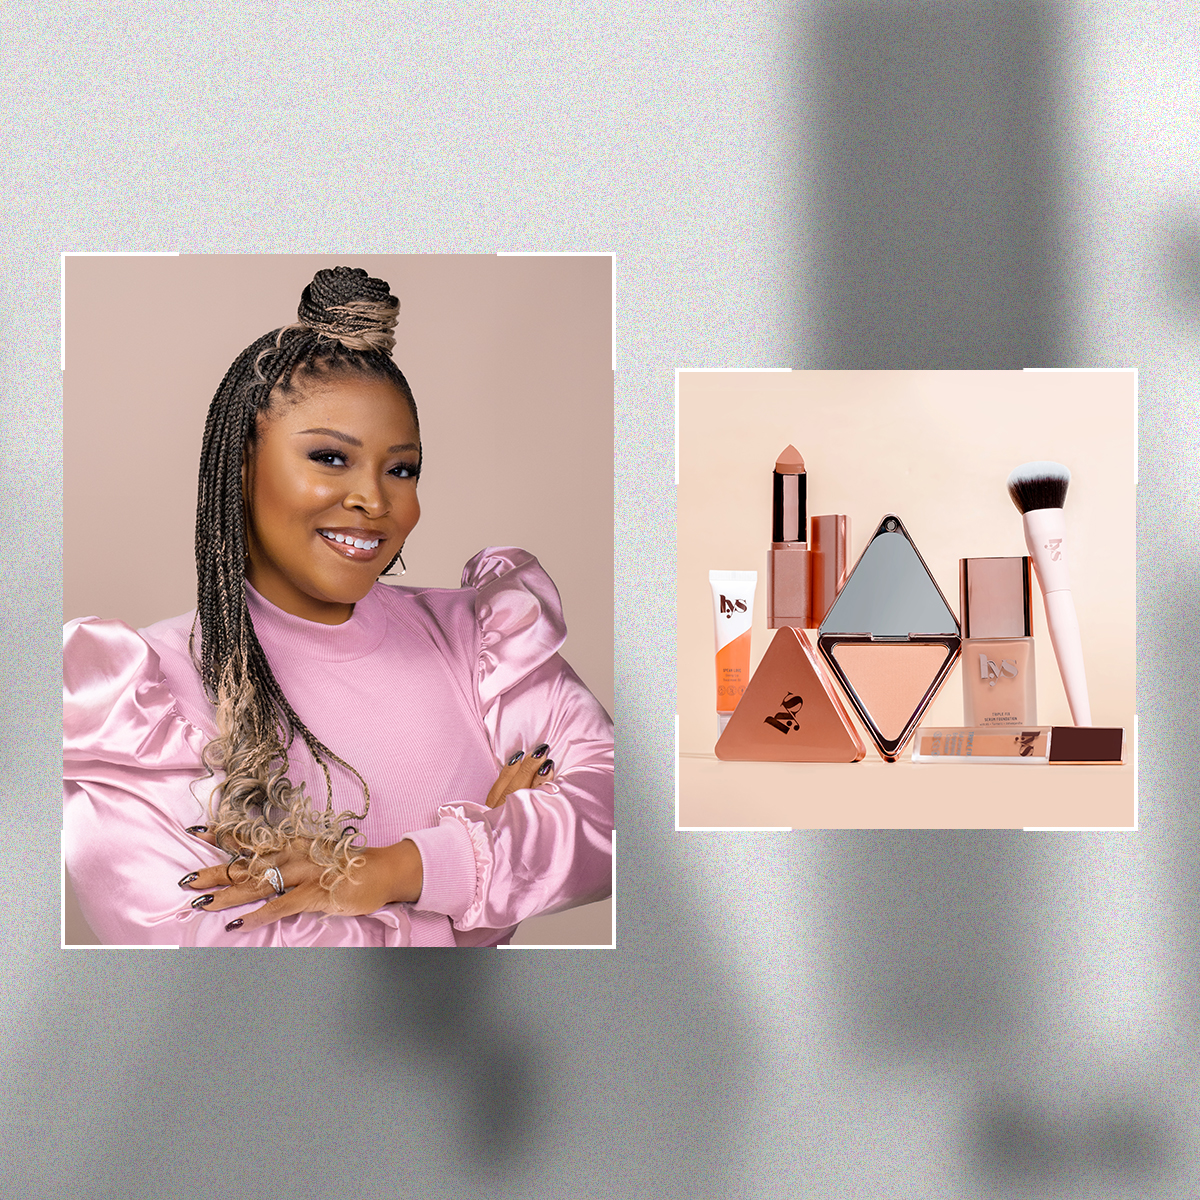 Tisha Thompson on Creating Makeup to Help Us "Love Who We Are, Unapologetically"